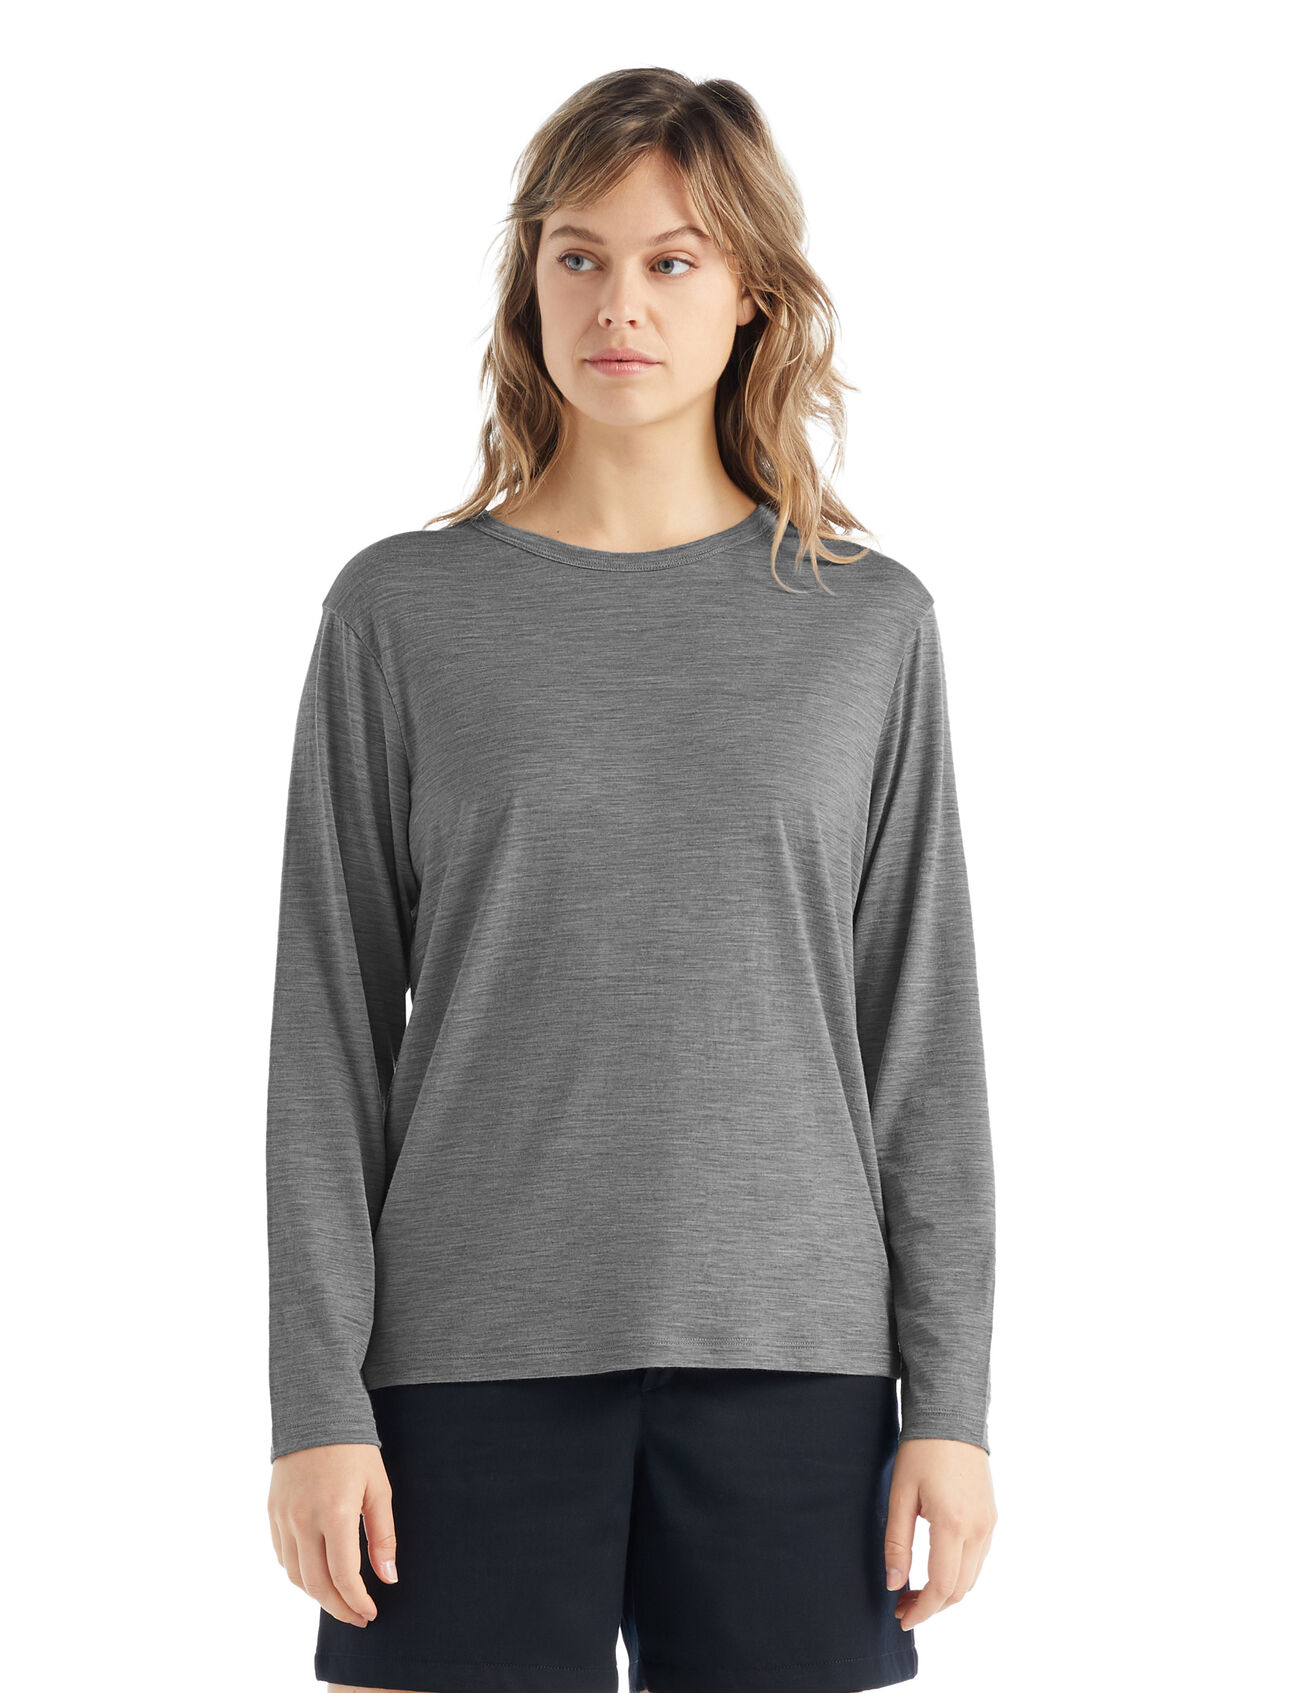 Womens Merino Granary Long Sleeve Tee A classic tee with a relaxed fit and soft, breathable, 100% merino wool fabric, the Granary Long Sleeve Tee is all about everyday comfort and style.